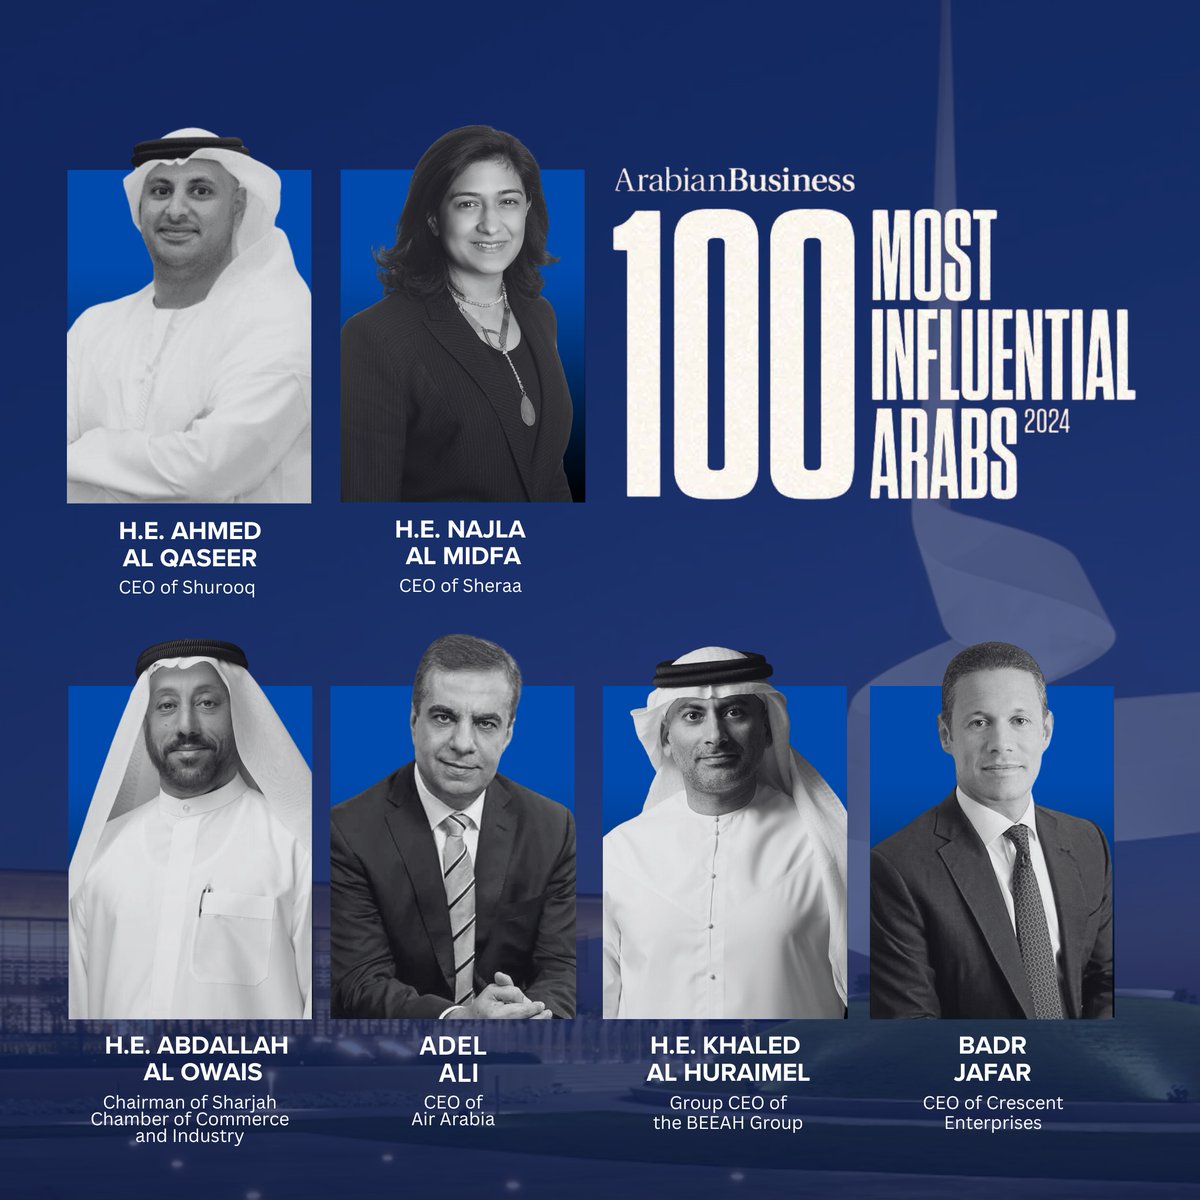 Proud to celebrate the remarkable Sharjah leaders honored among the 100 Most Influential Arabs in 2024! Their exceptional achievements and commitment reflect the emirate's spirit of innovation and progress. arabianbusiness.com/powerlists/100…